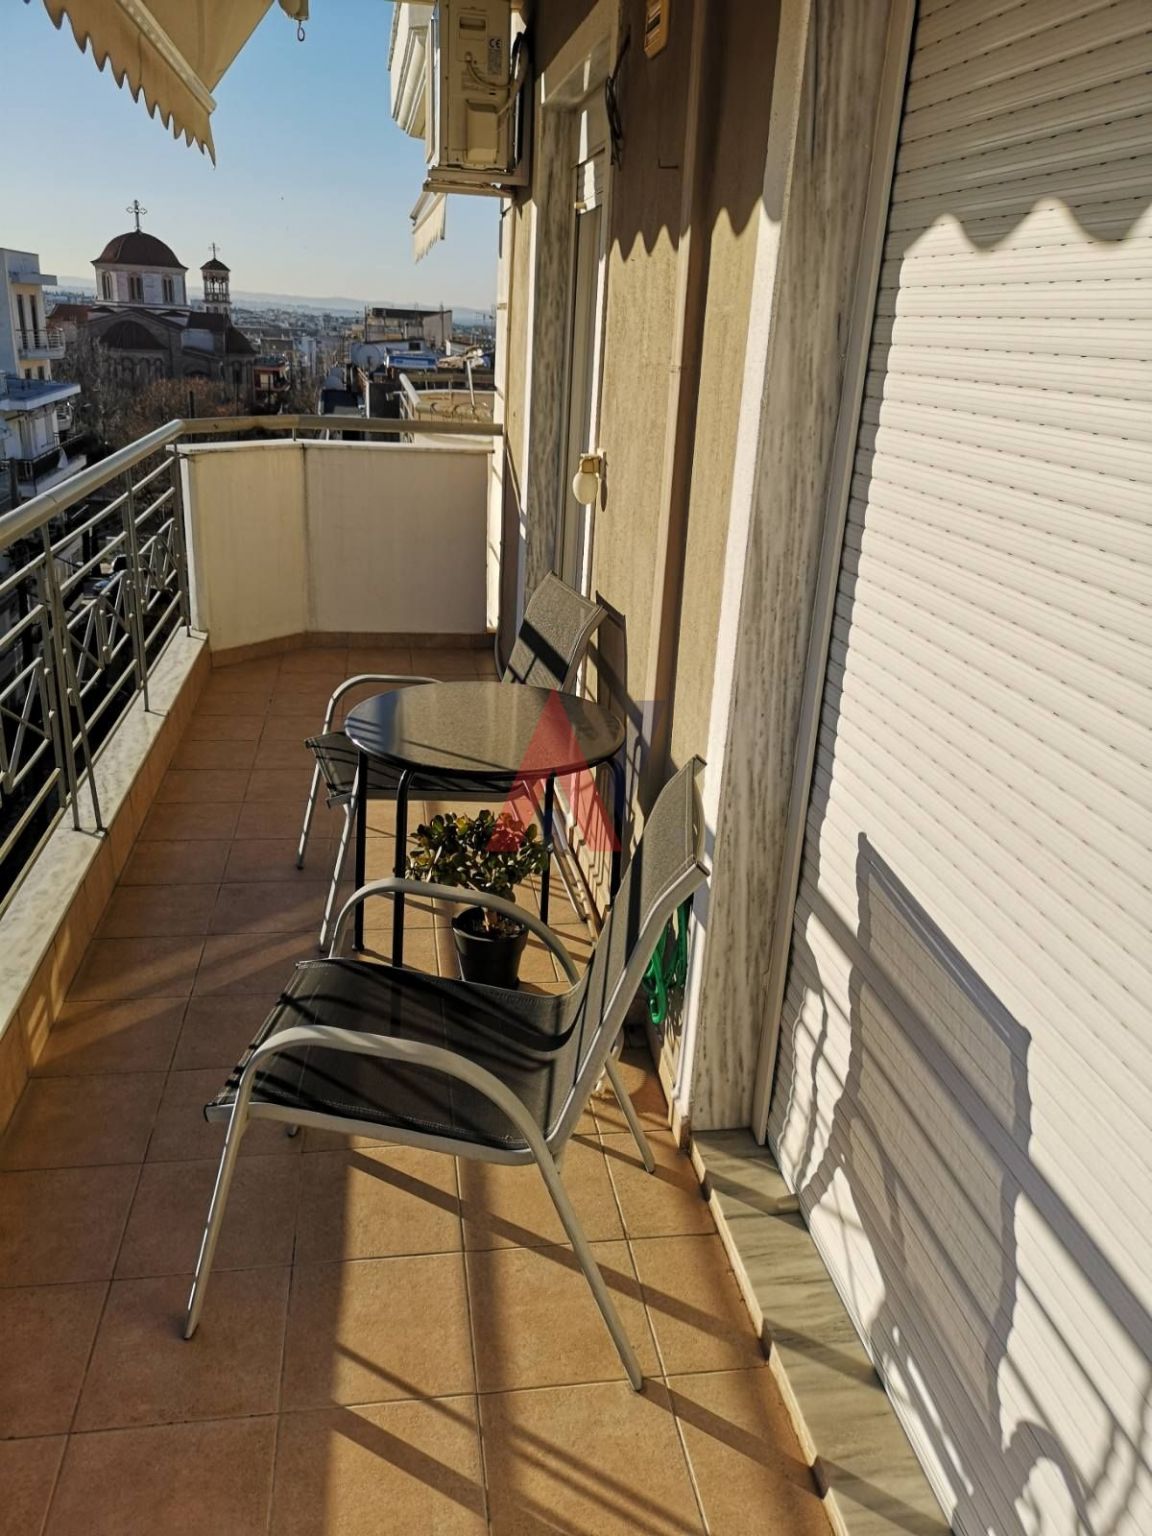 For sale 5th floor Apartment 130sqm Stavroupoli Thessaloniki 